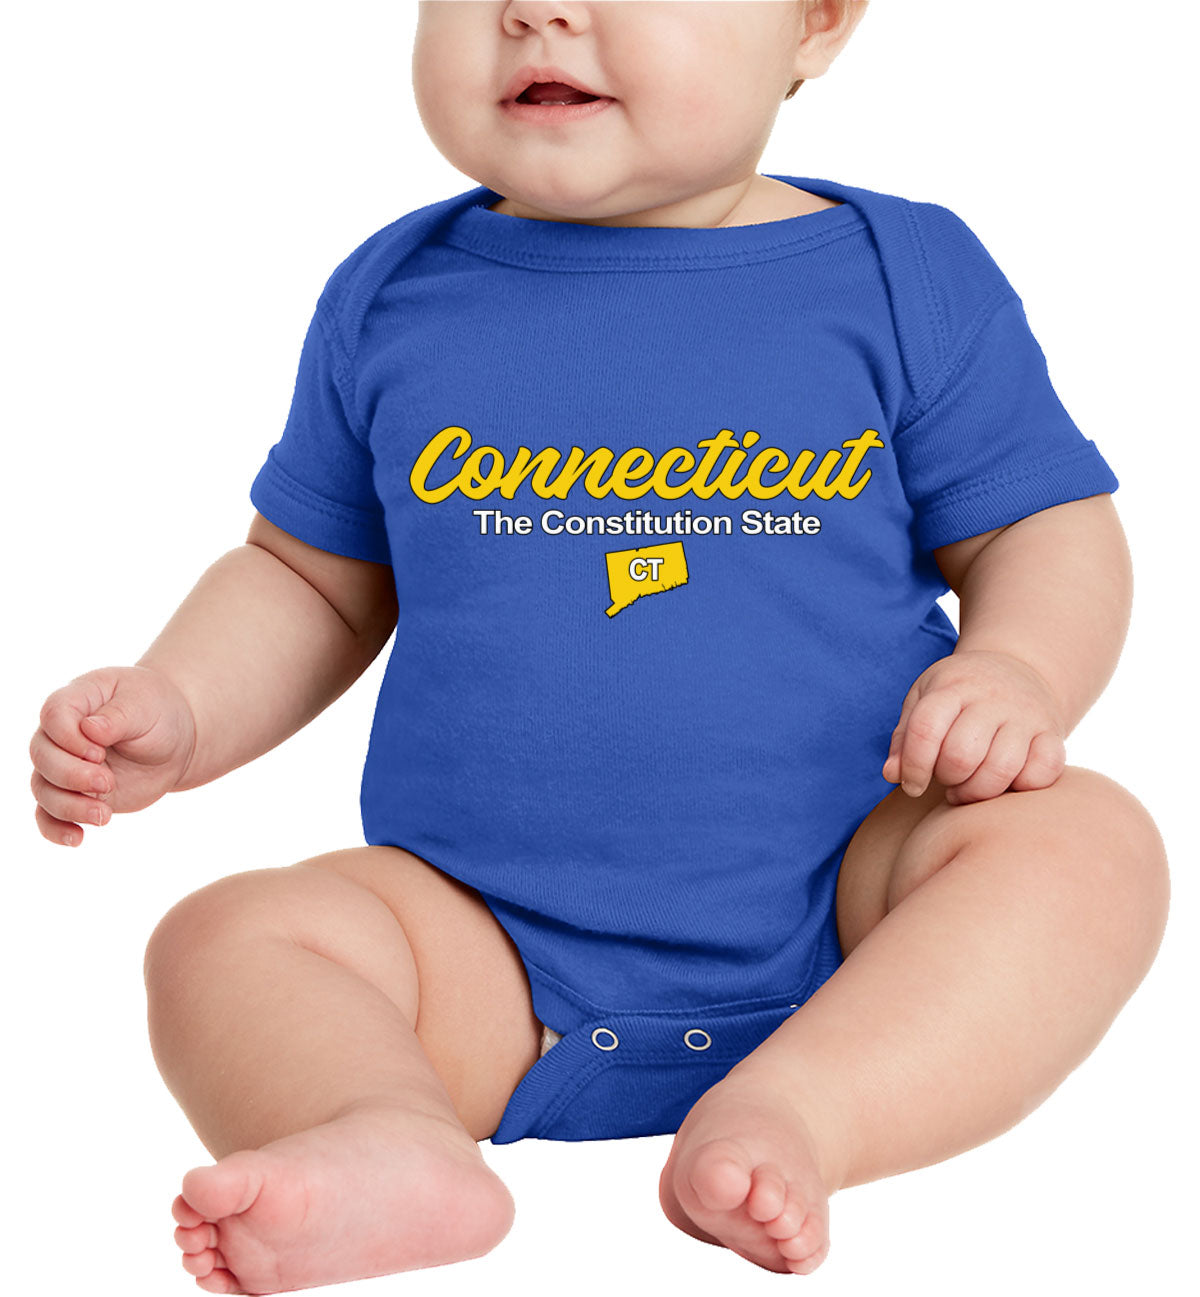 Connecticut The Constitution State Baby Onesie